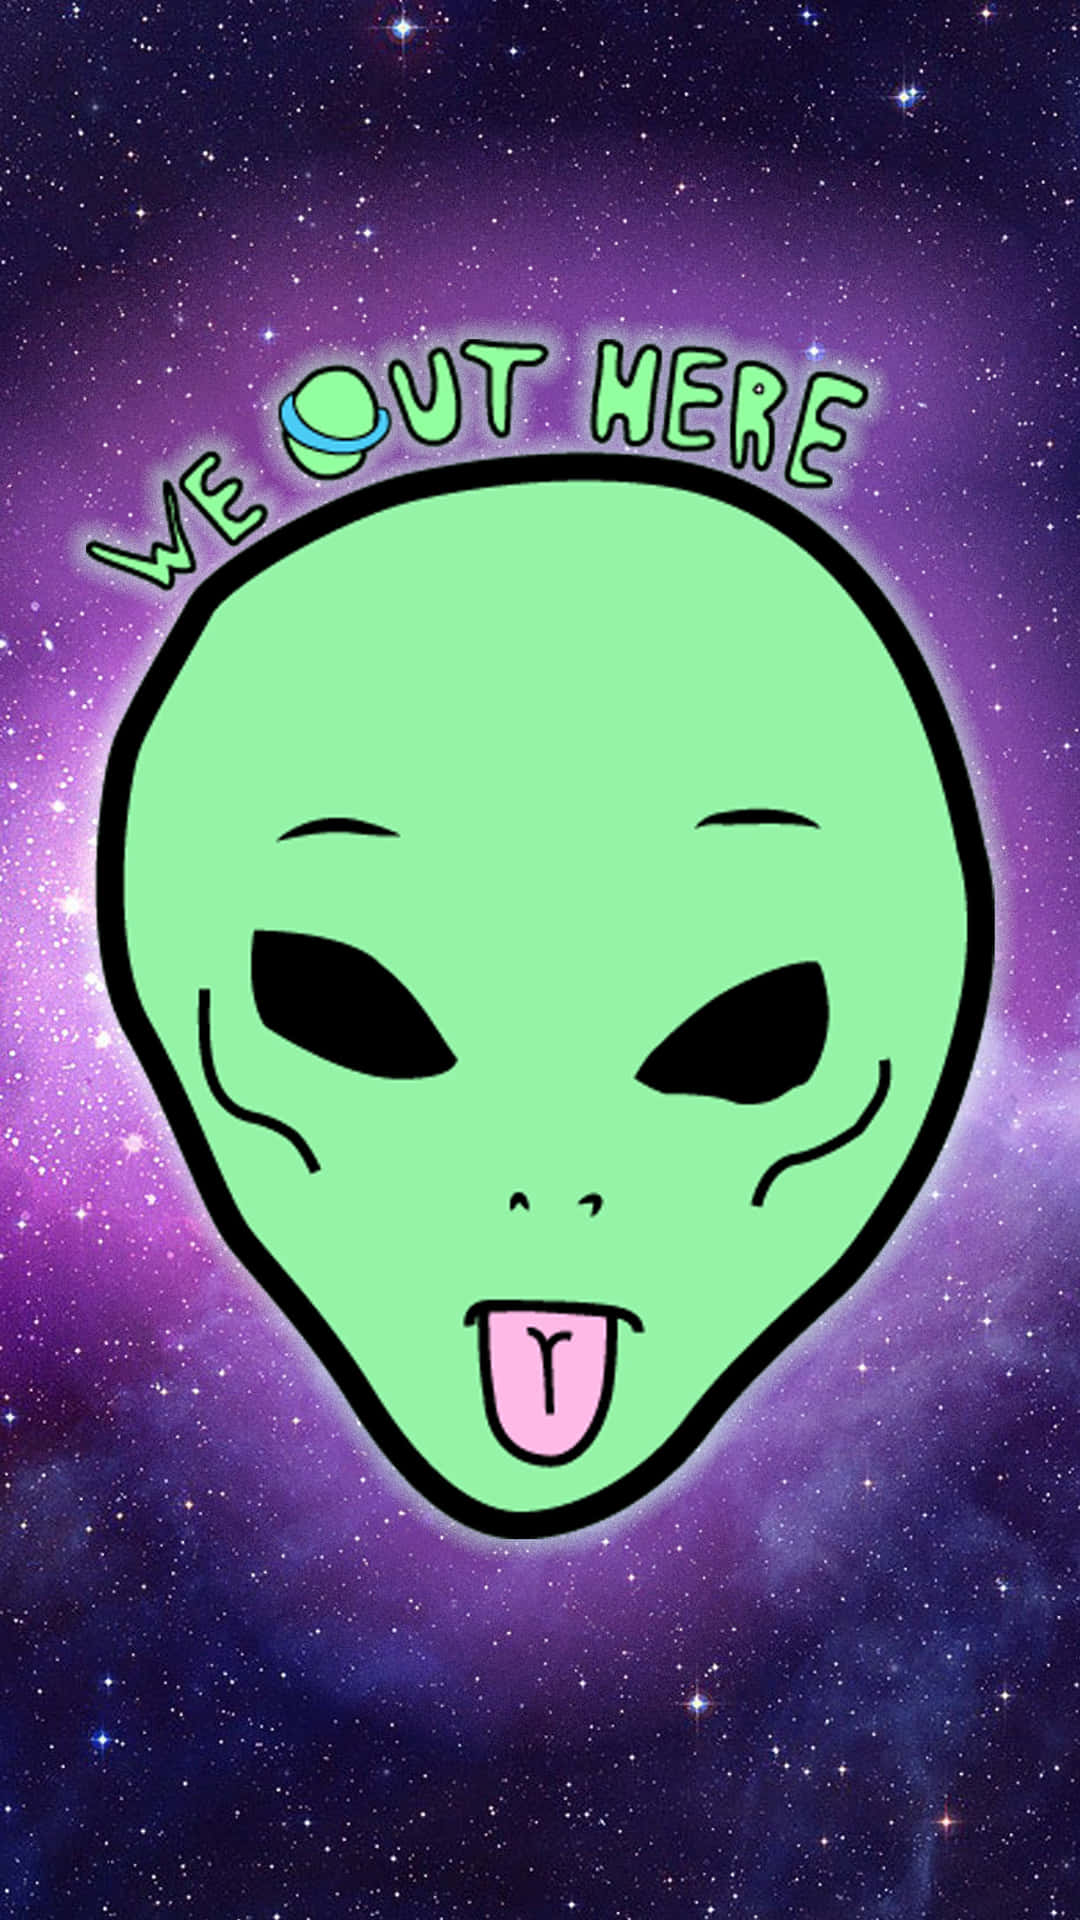 We Out Here - A Green Alien With Tongue Sticking Out